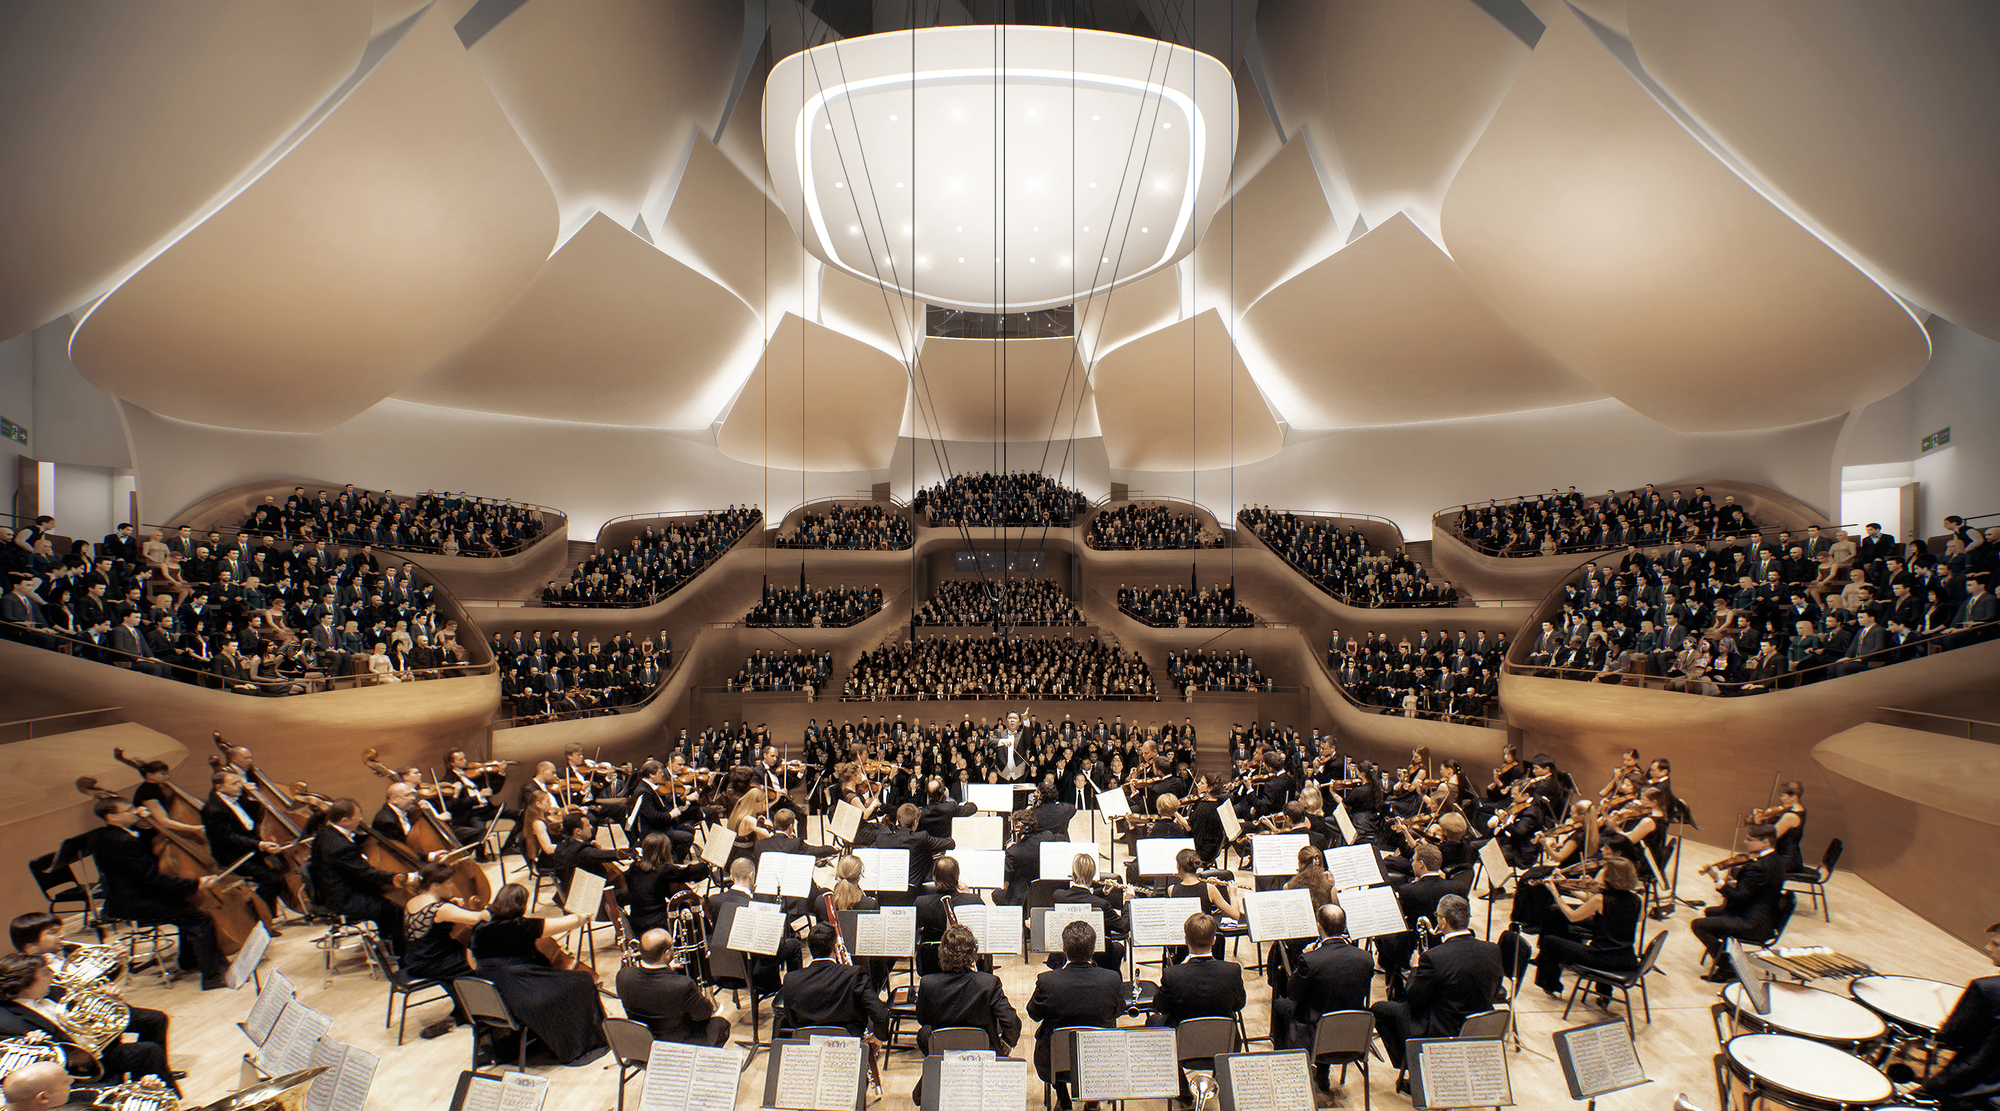 The concert hall seen from the point of view of where the musicians play